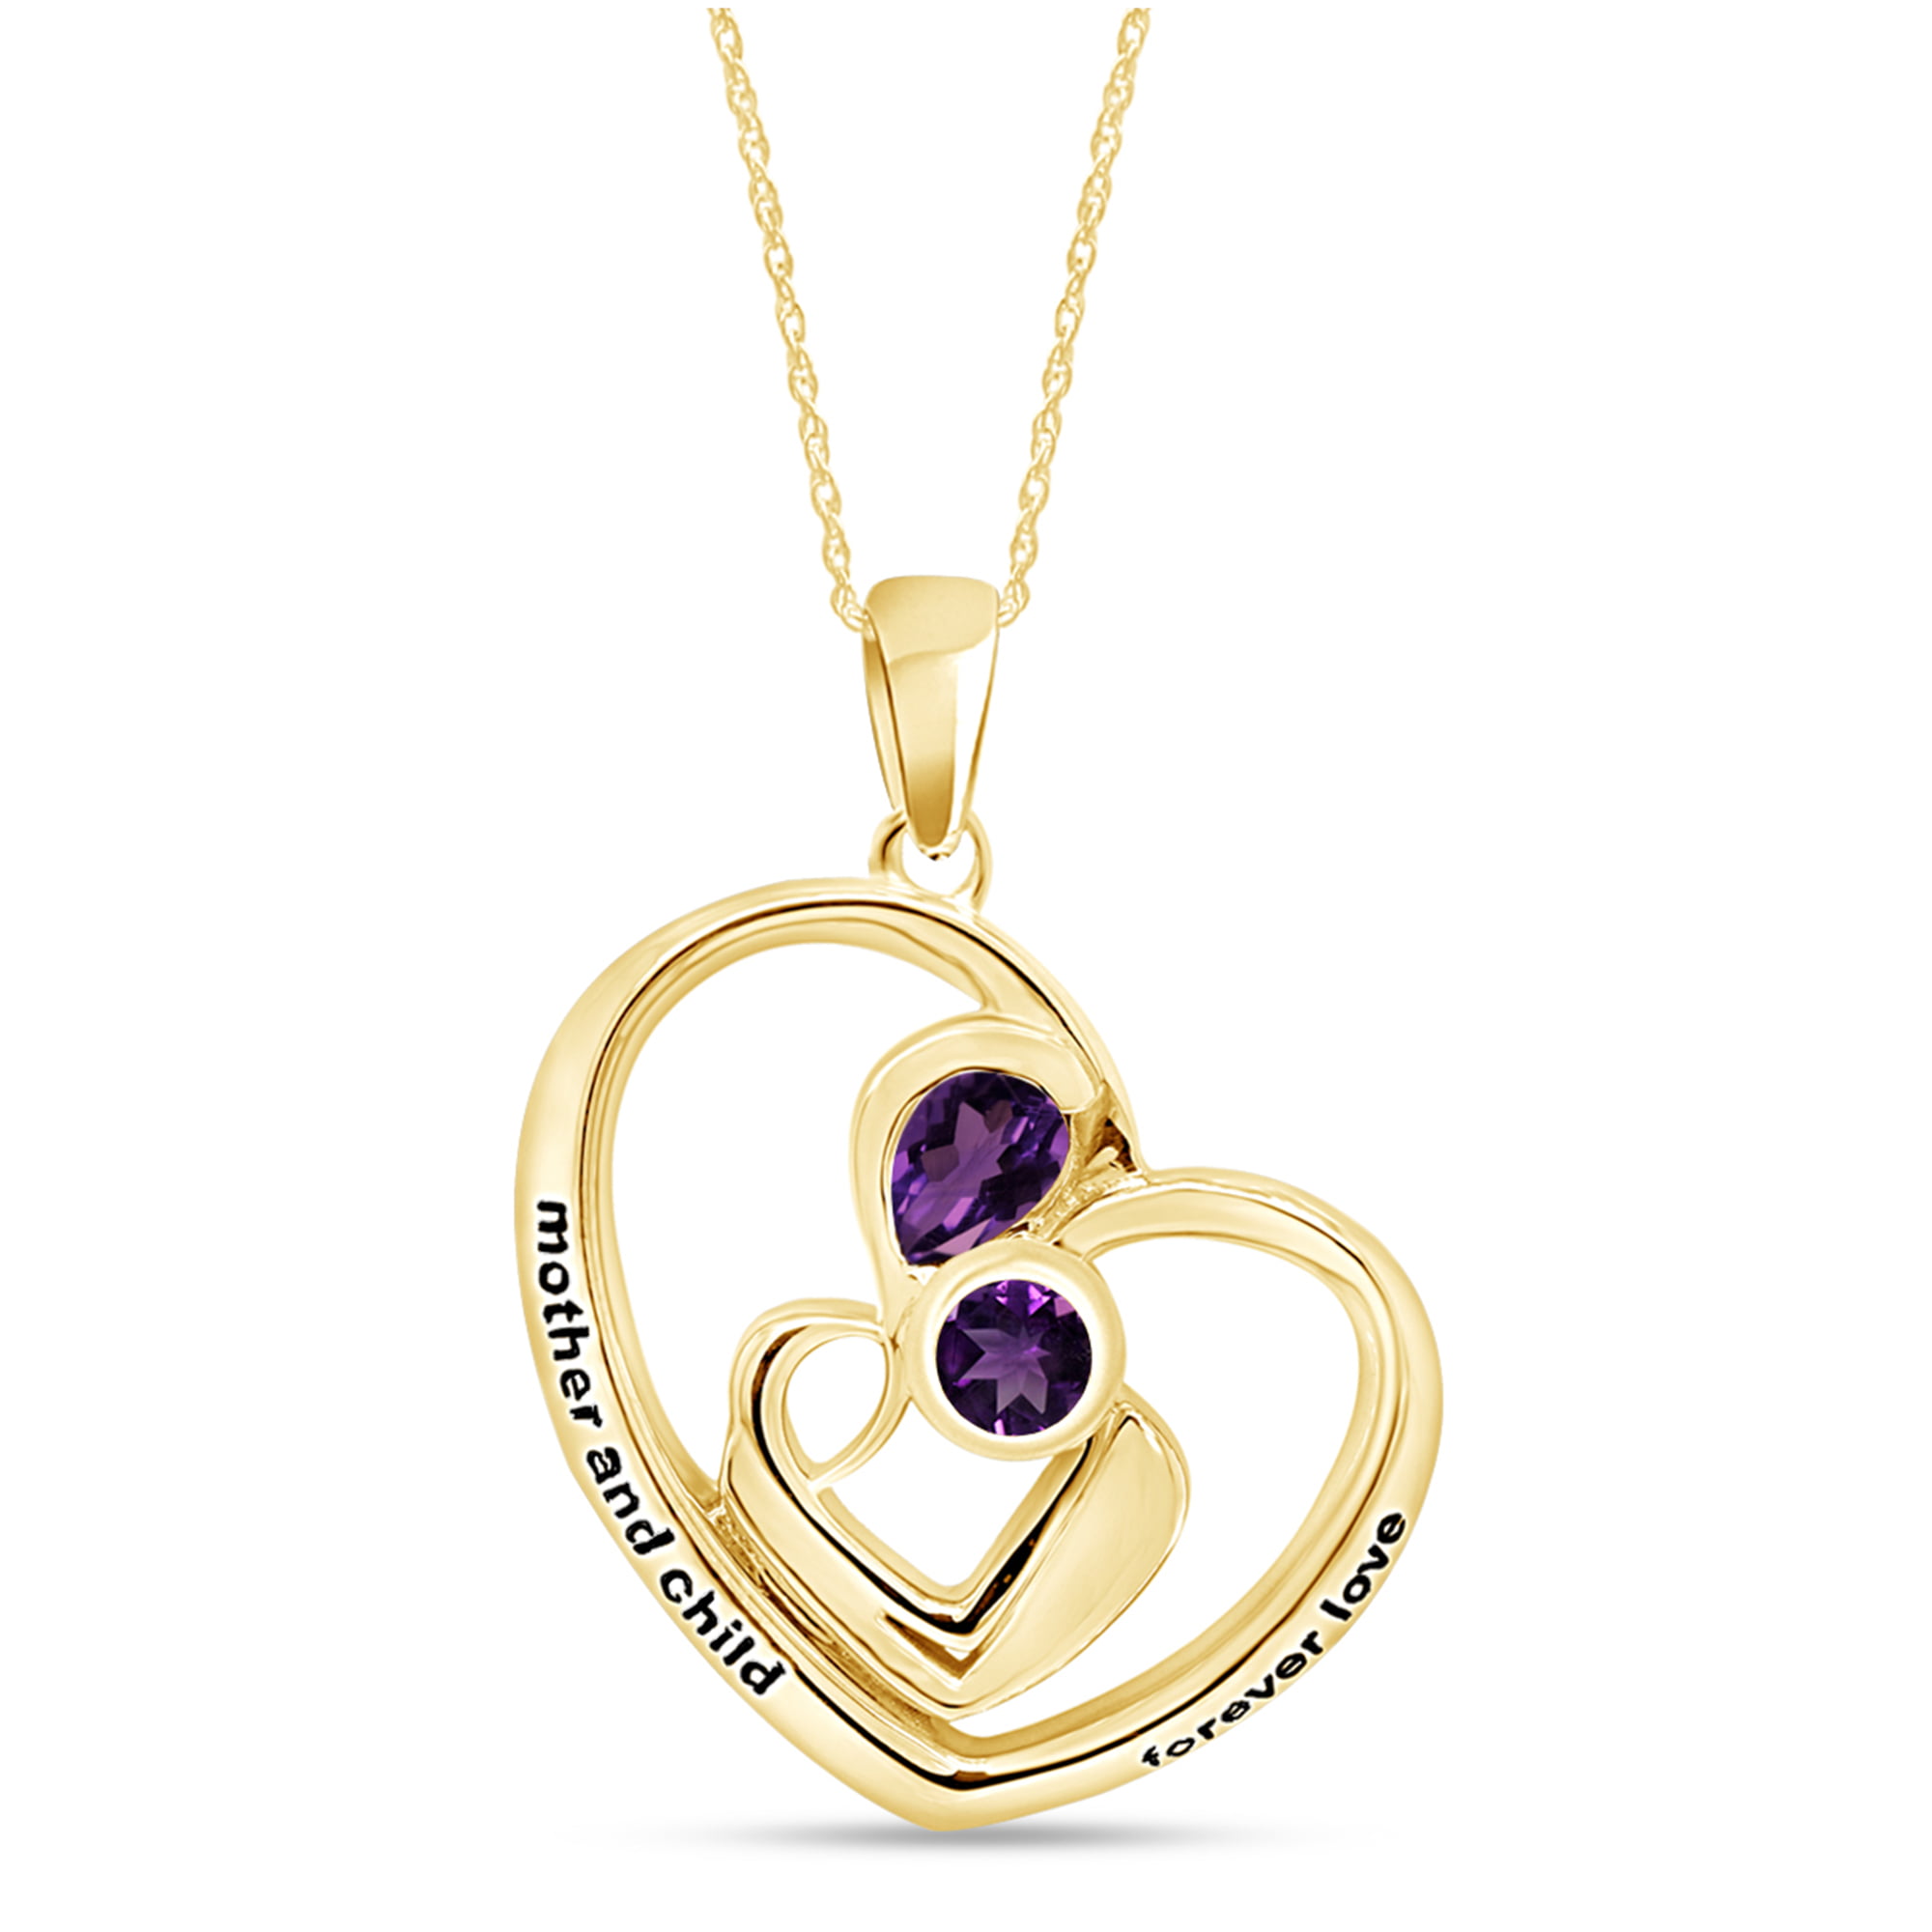 Love Heart Pendant Necklace Mom Wife Birthday Gifts for Her November December Birthstone Citrine Blue Topaz Garnet Amethyst Simulated Diamond Emerald Pearl Sterling Silver Jewelry for Women 